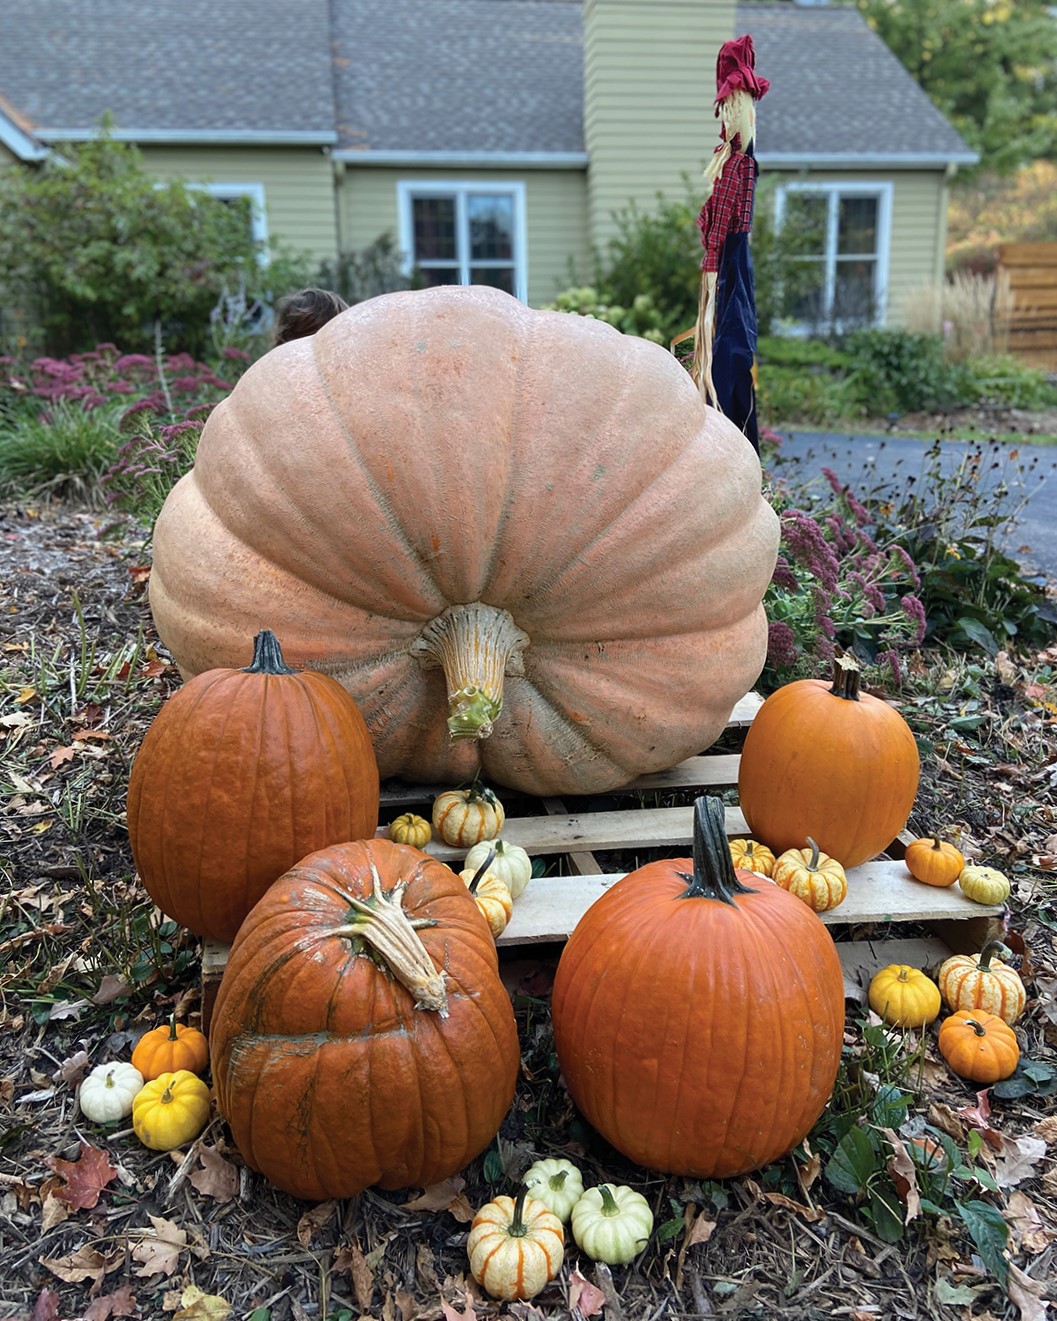 Nick Decker’s 657-pound pumpkin at the end of his driveway.